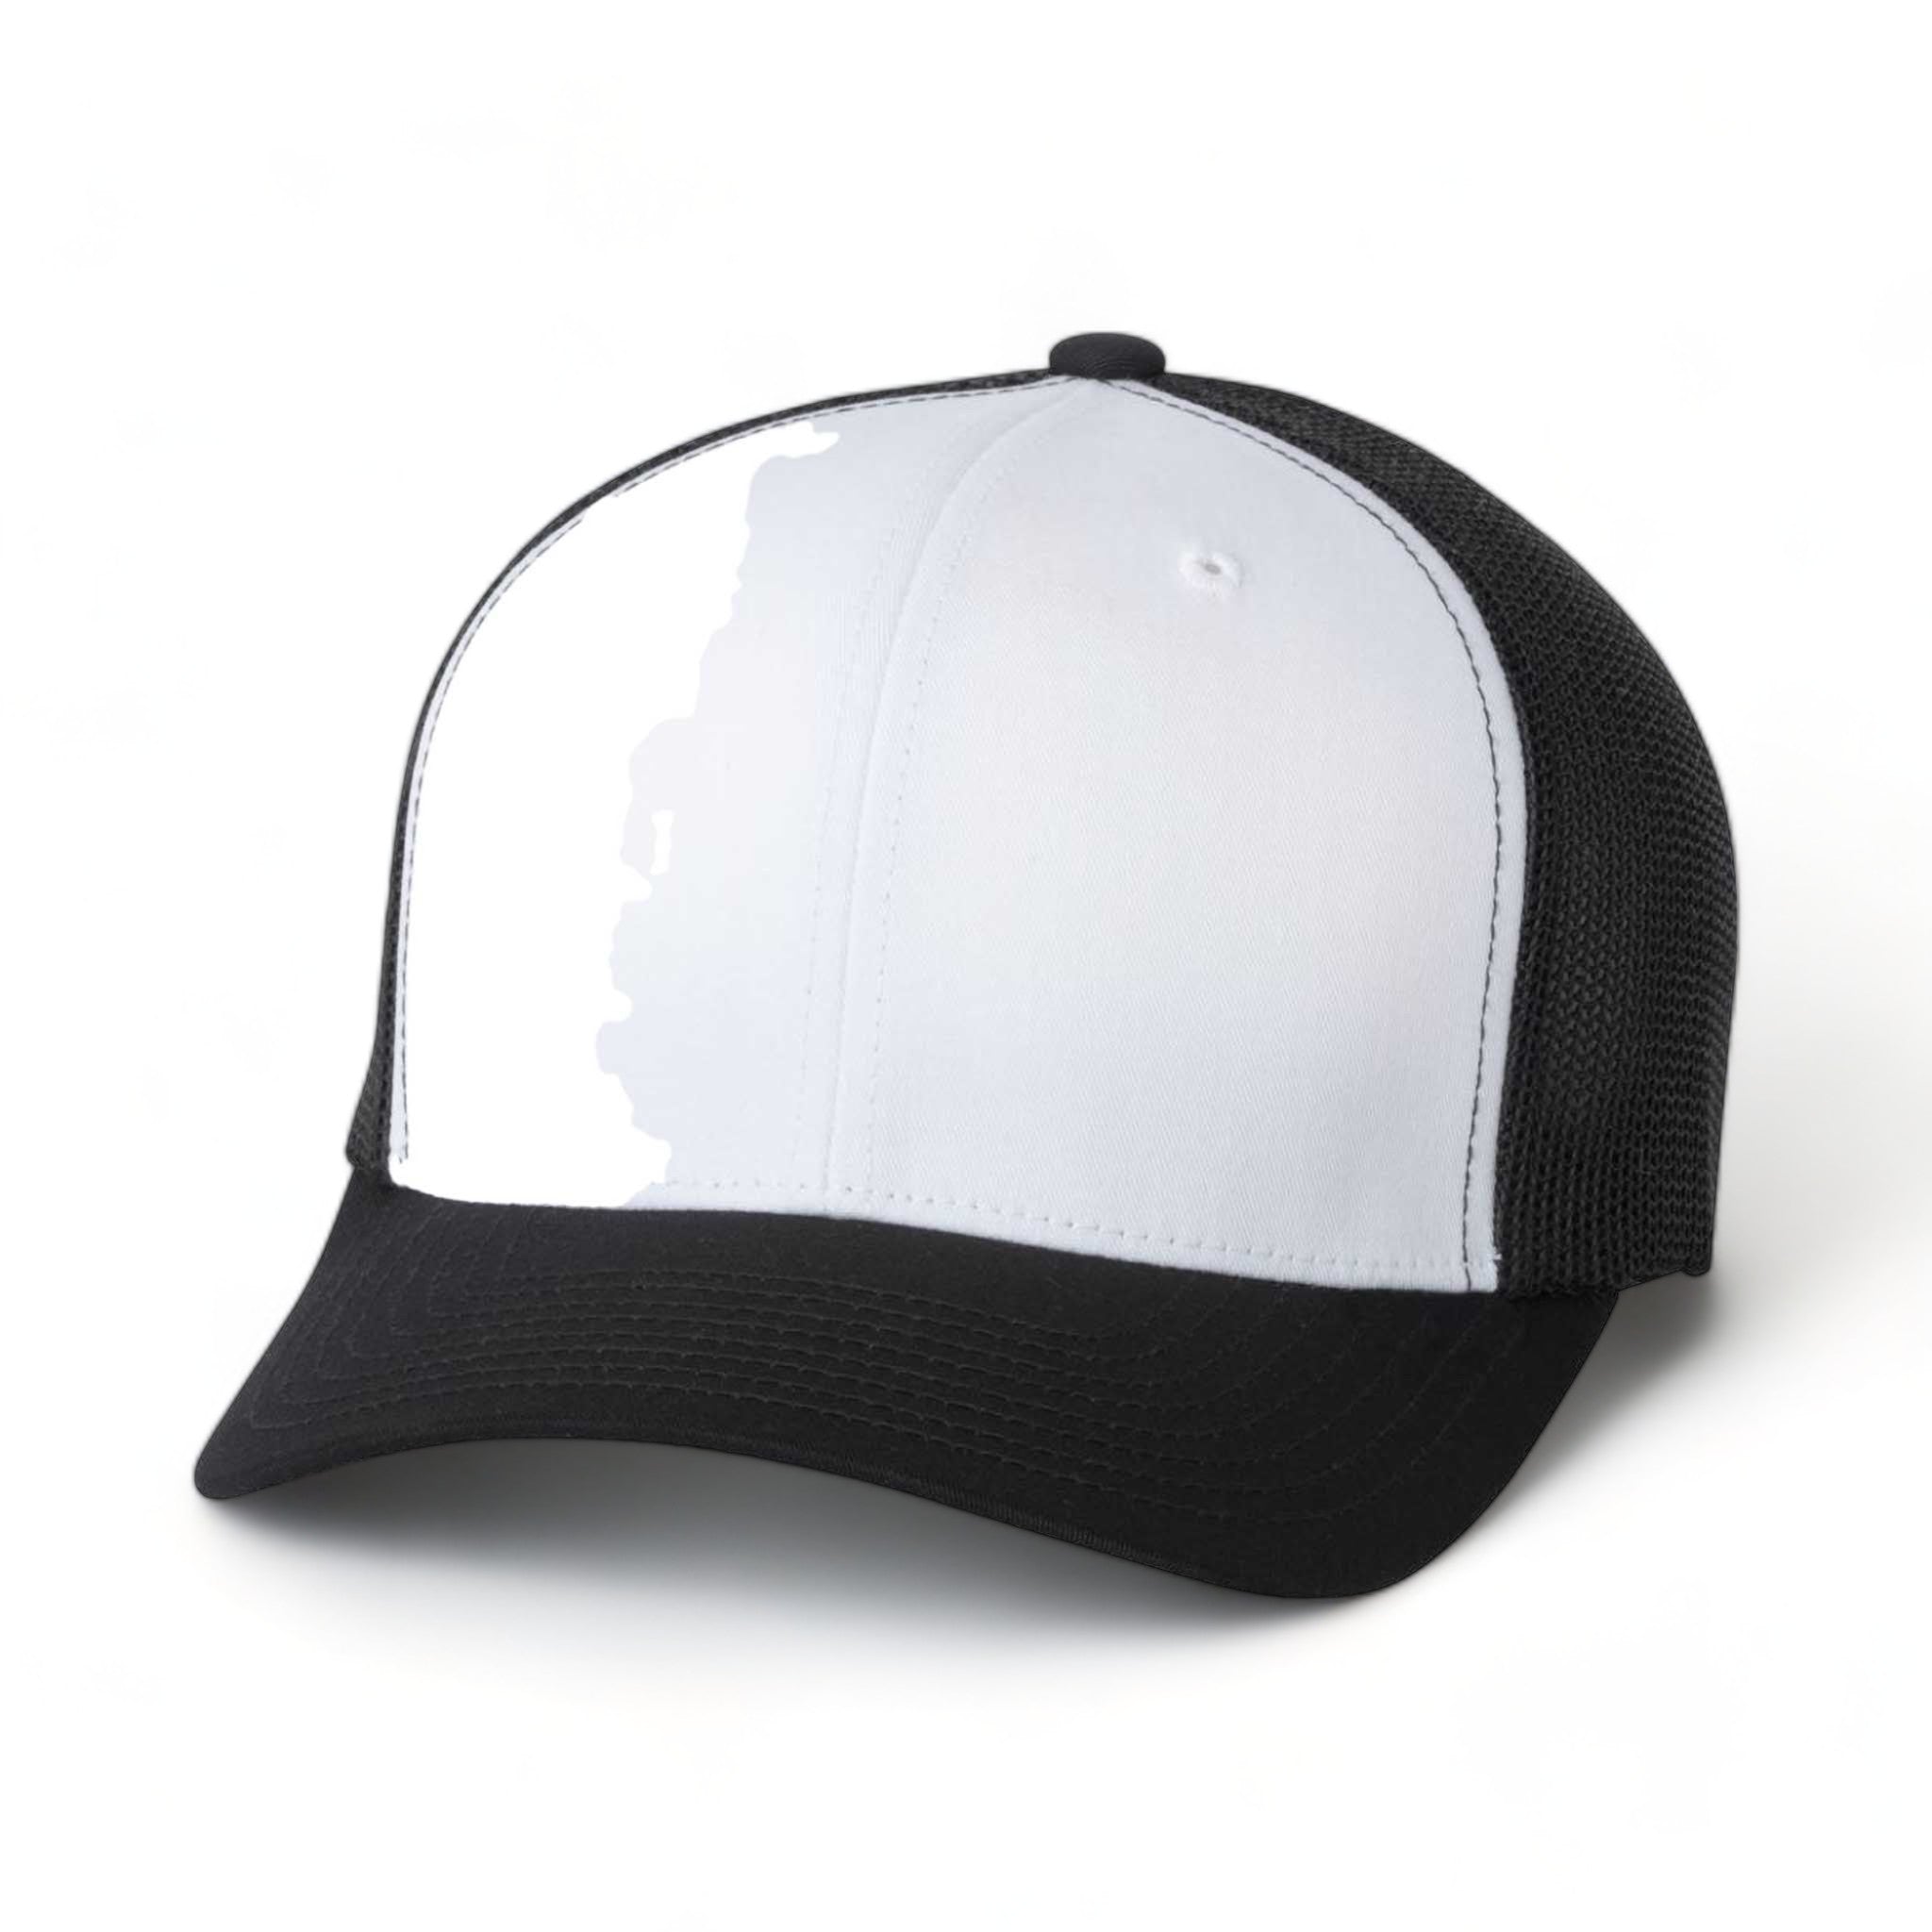 Front view of Flexfit 6511 custom hat in black, white and black